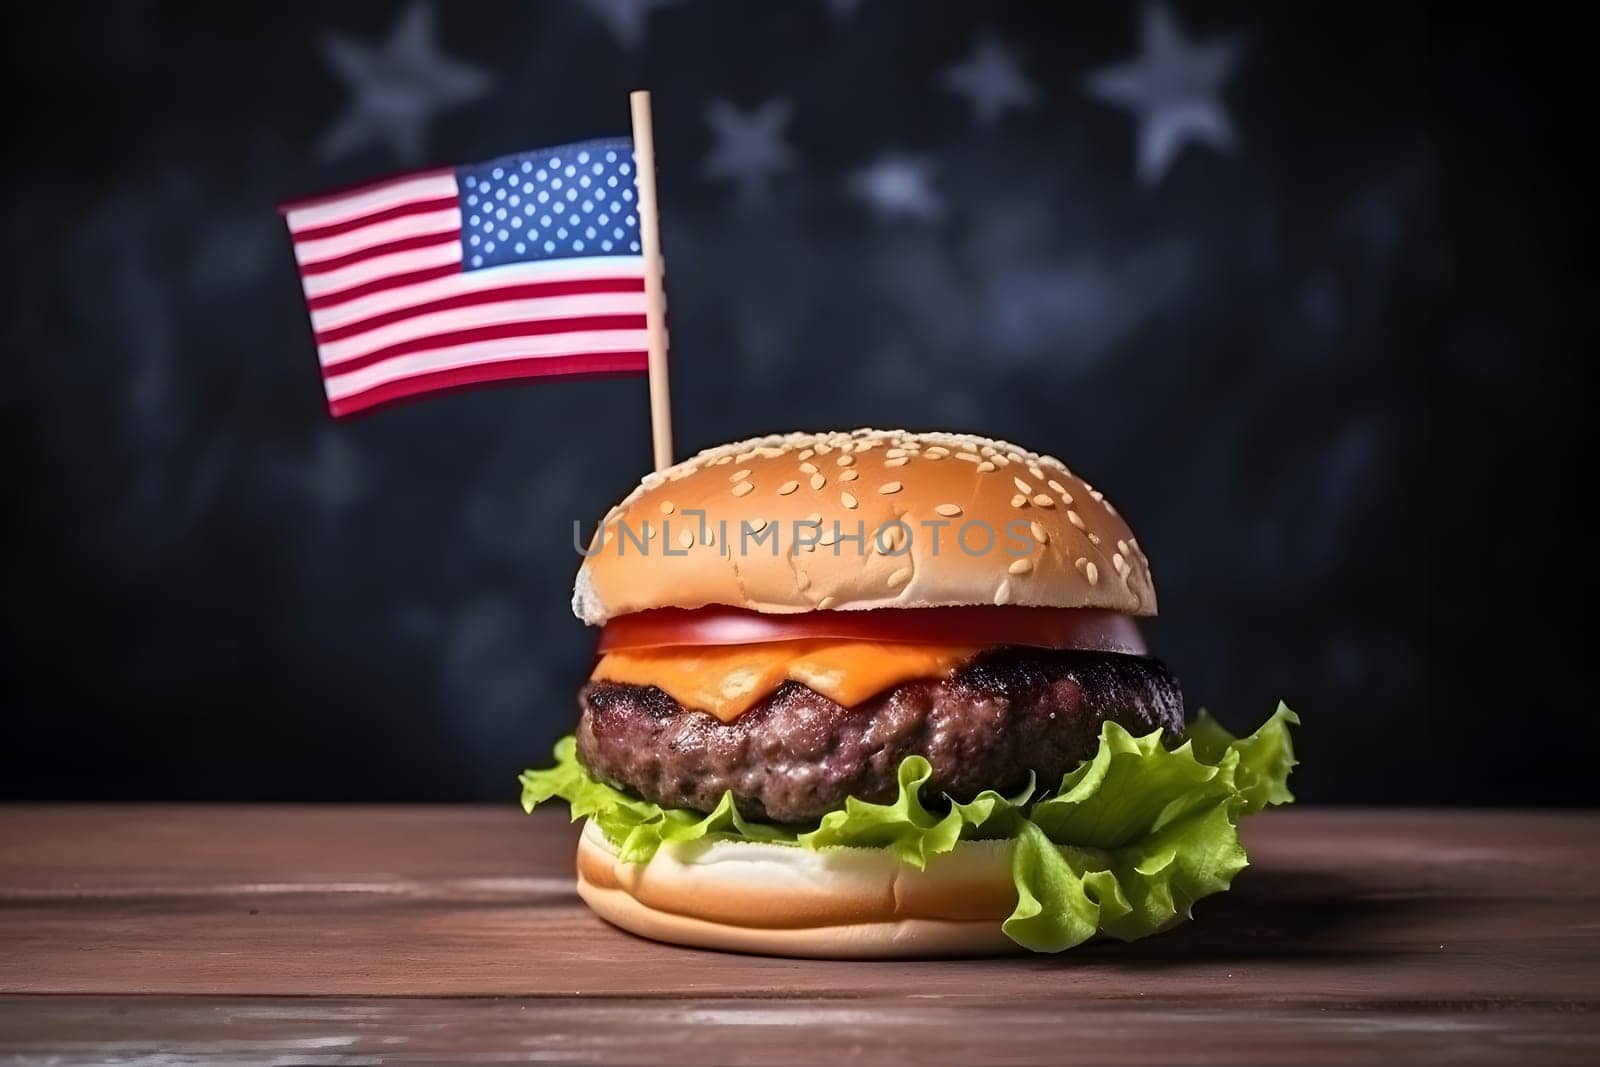 small hamburger with small american flag on it, dark background, US patriotic proud theme. Neural network generated in May 2023. Not based on any actual scene or pattern.